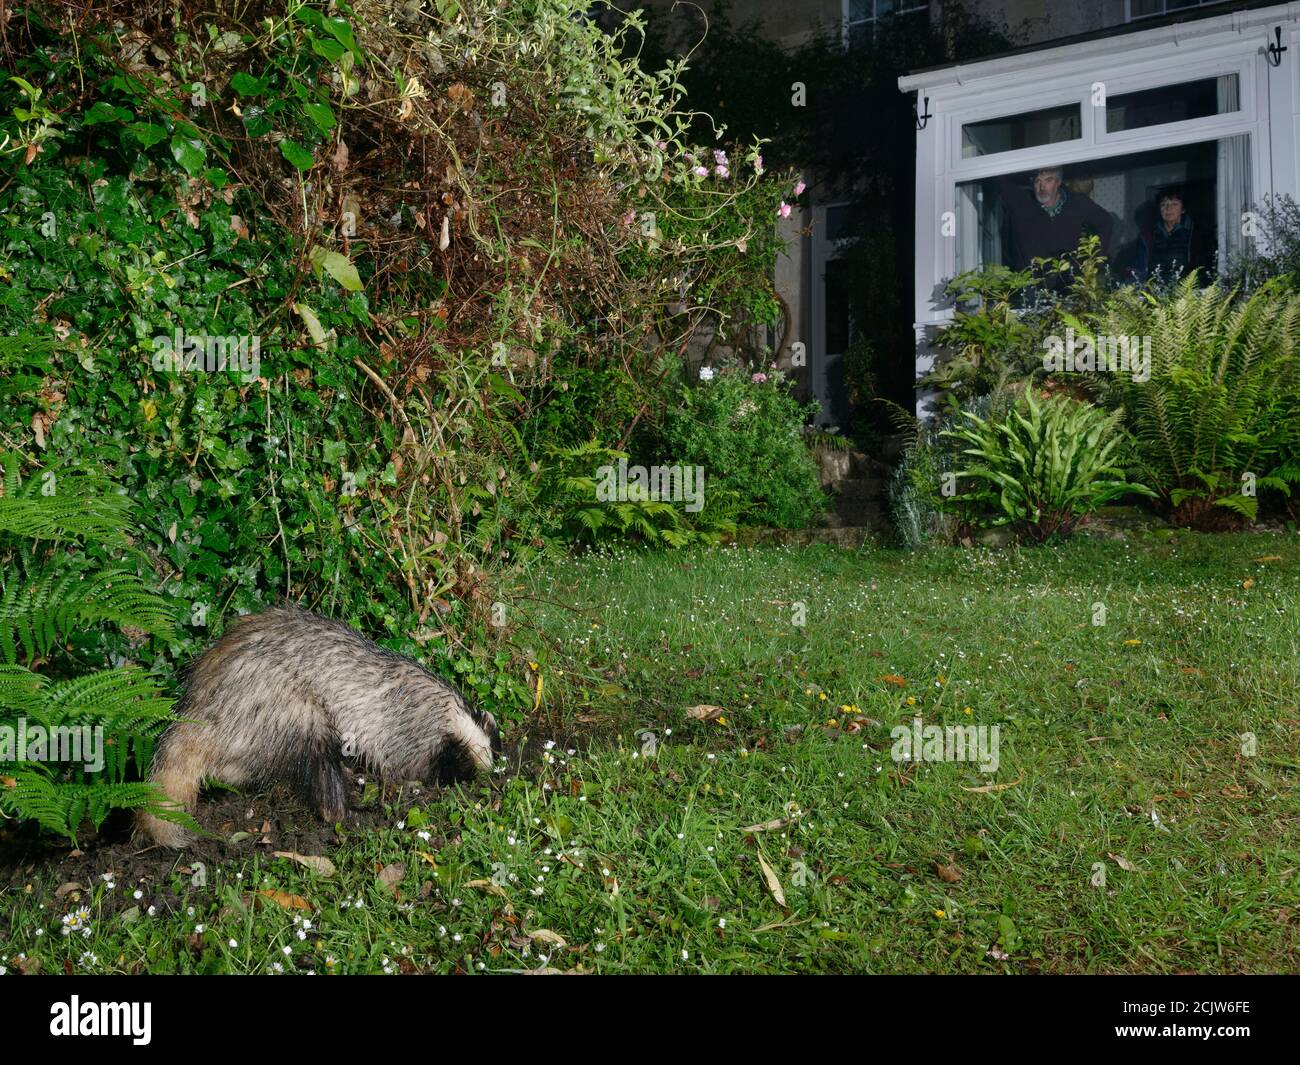 European badger (Meles meles) digging in a garden lawn at night, possibly to excavate a Bumblebee nest to feed on, with the homeowners watching in the Stock Photo